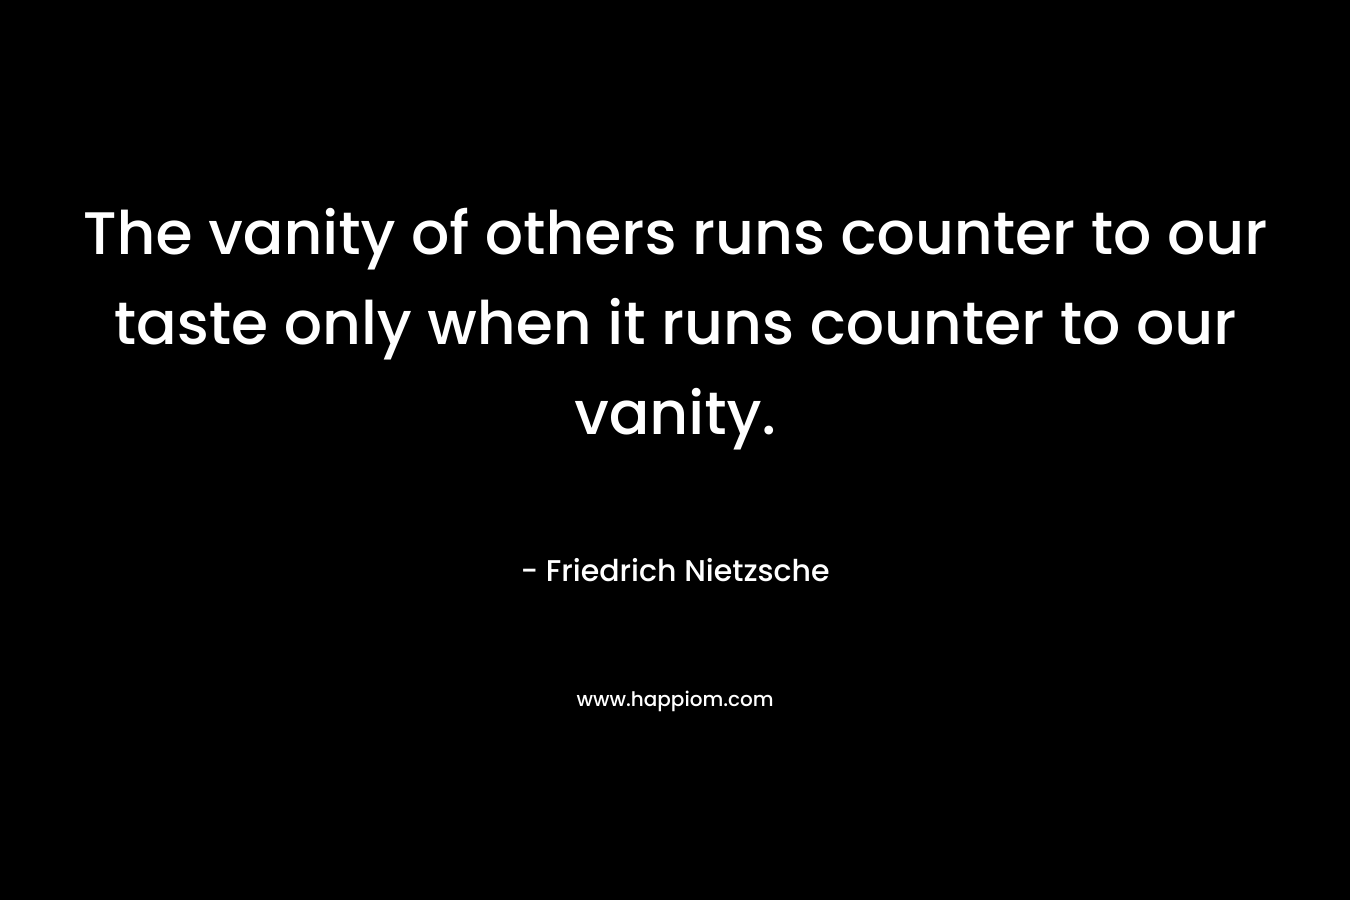 The vanity of others runs counter to our taste only when it runs counter to our vanity.